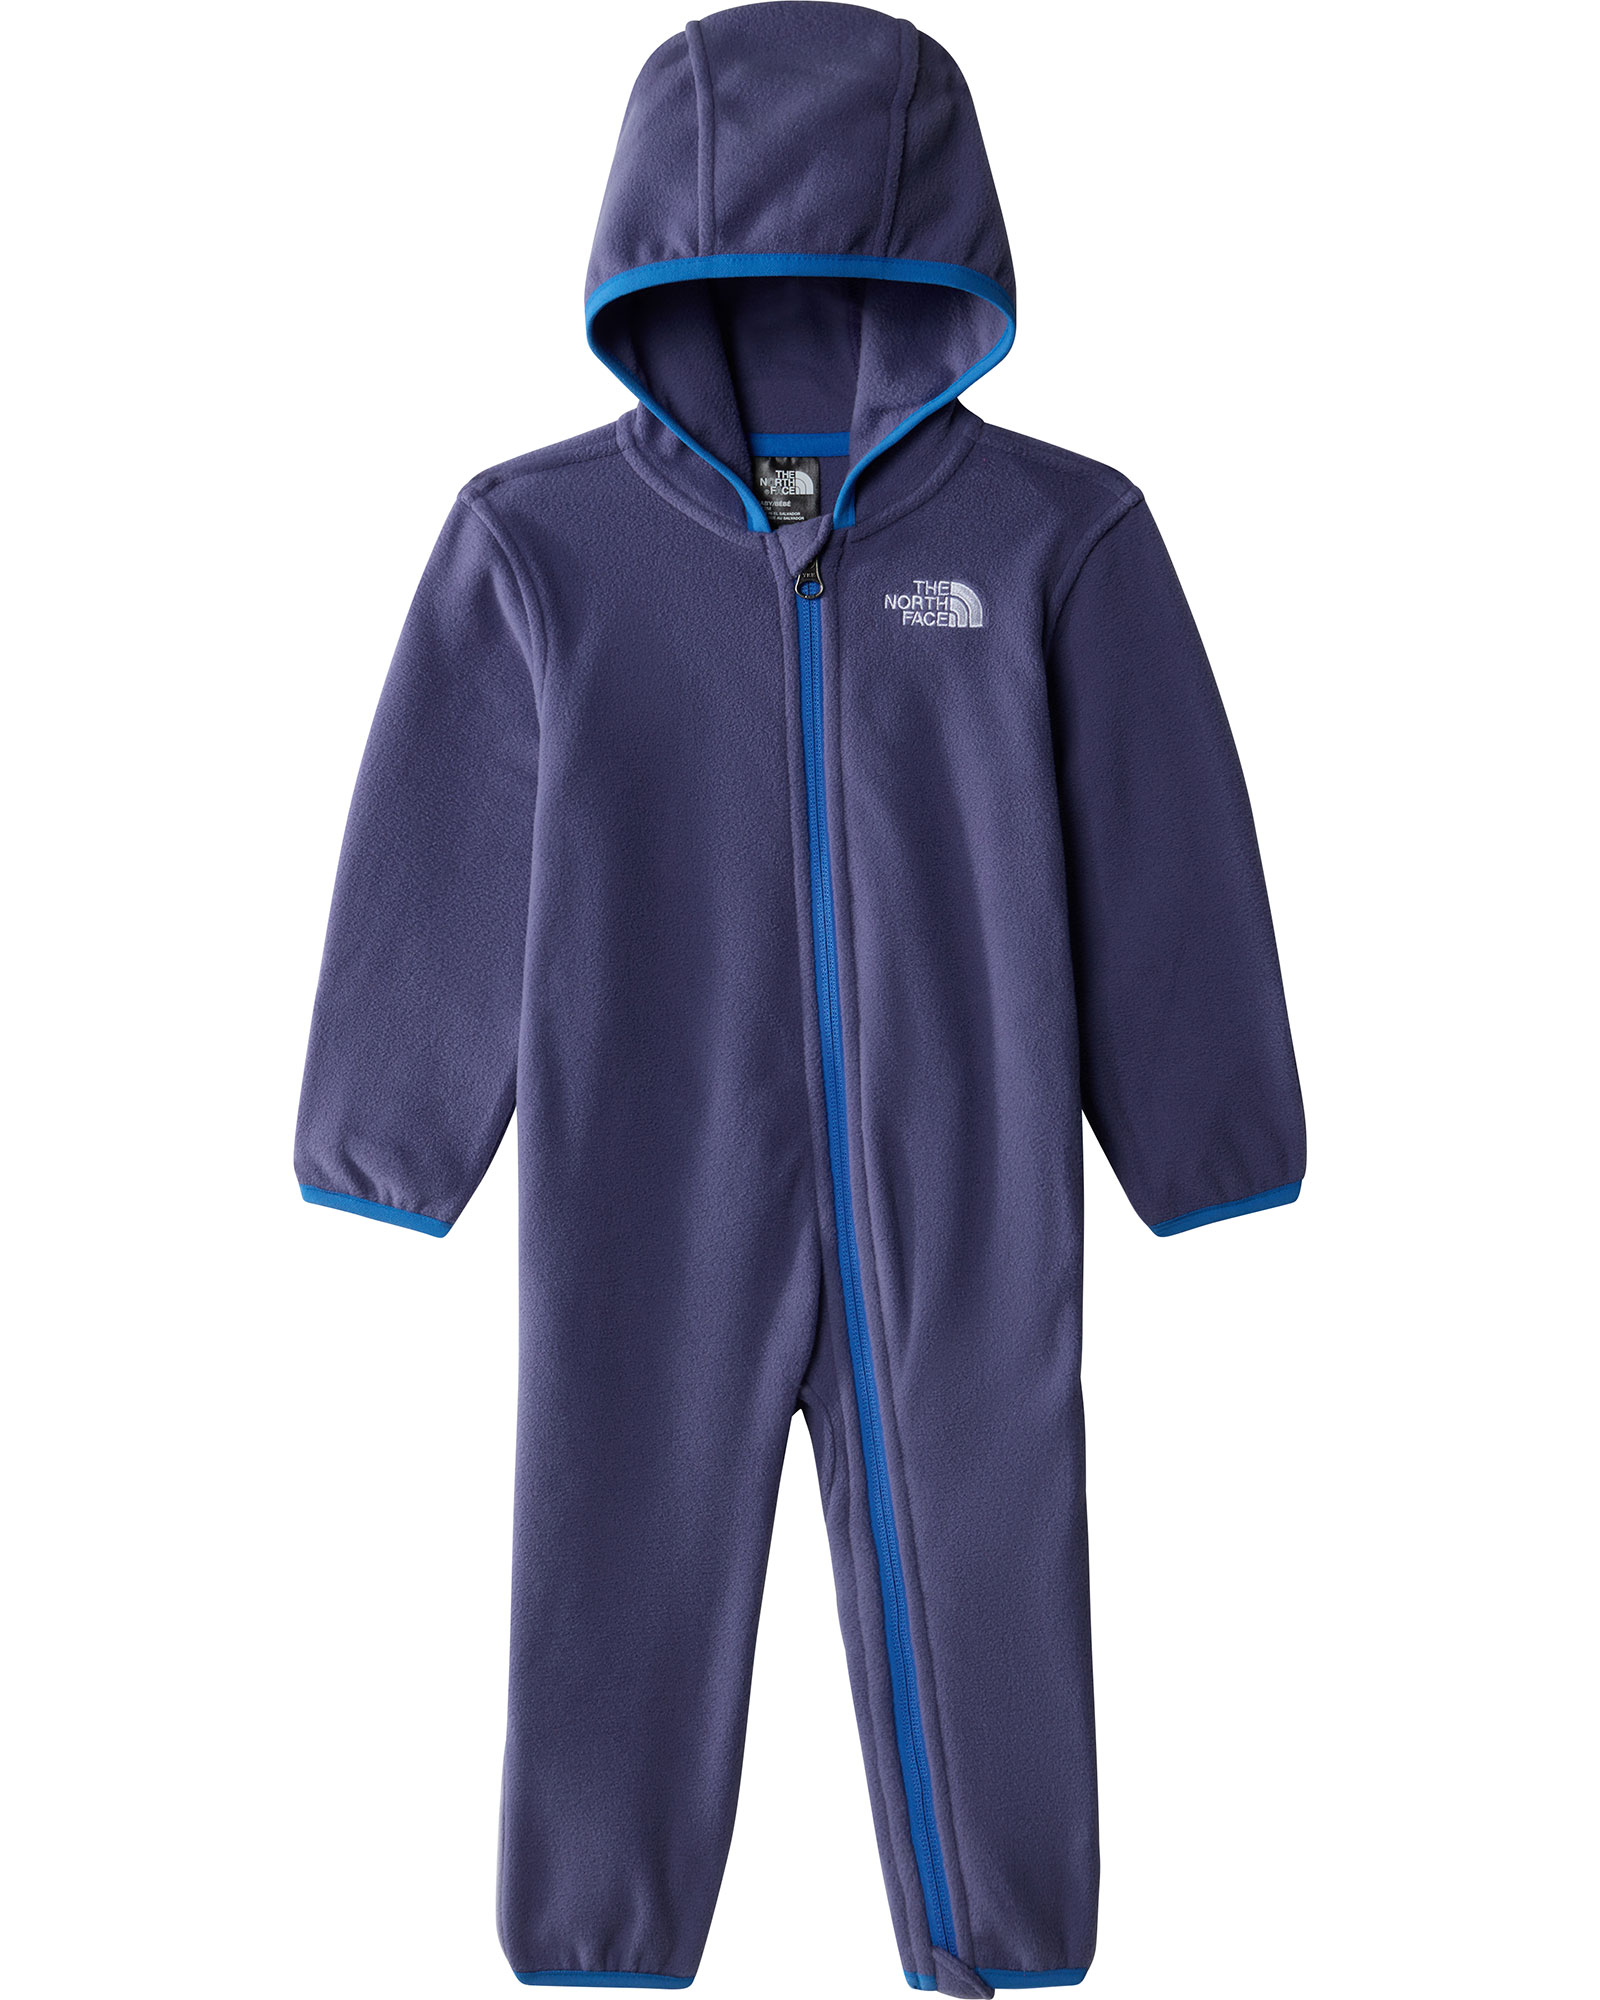 The North Face Baby Glacier One Piece - Cave Blue 18